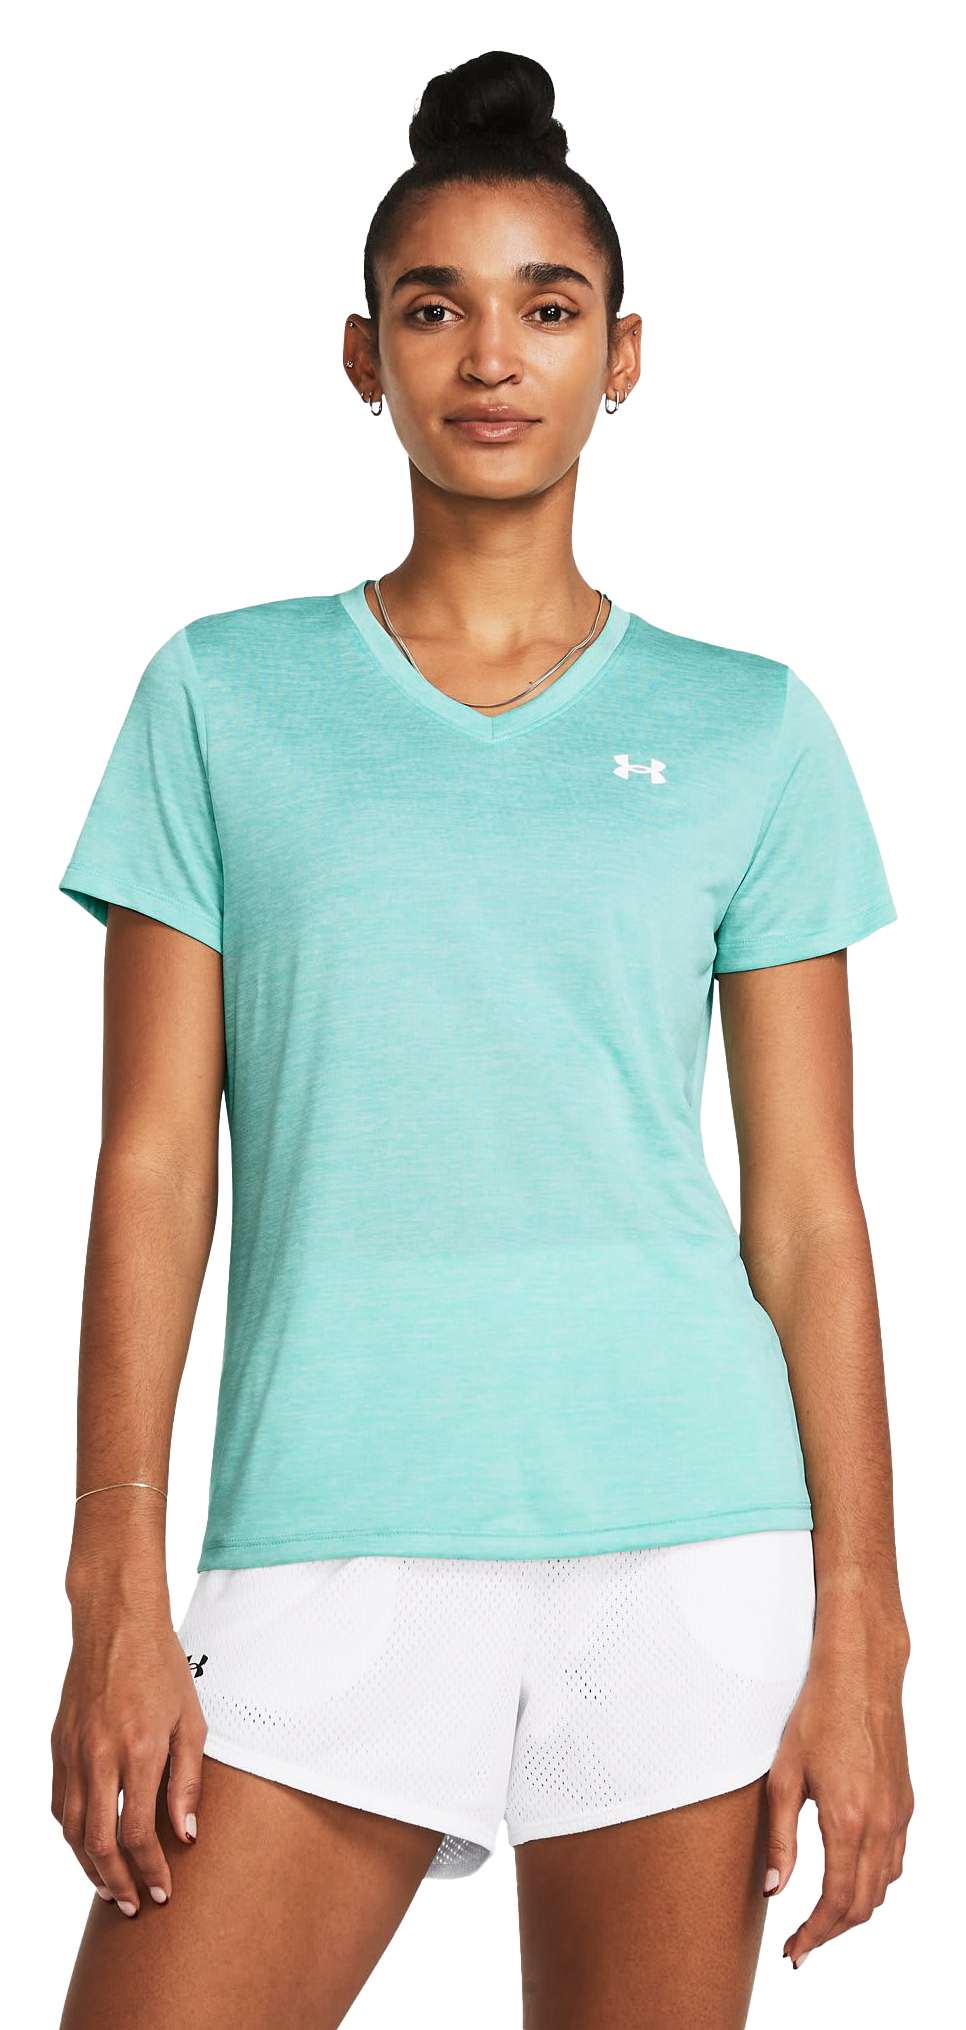 NEW Women Under Armour Twisted Tech Loose Gym Logo V-Neck T-Shirt Tee  S-XXL, NWT